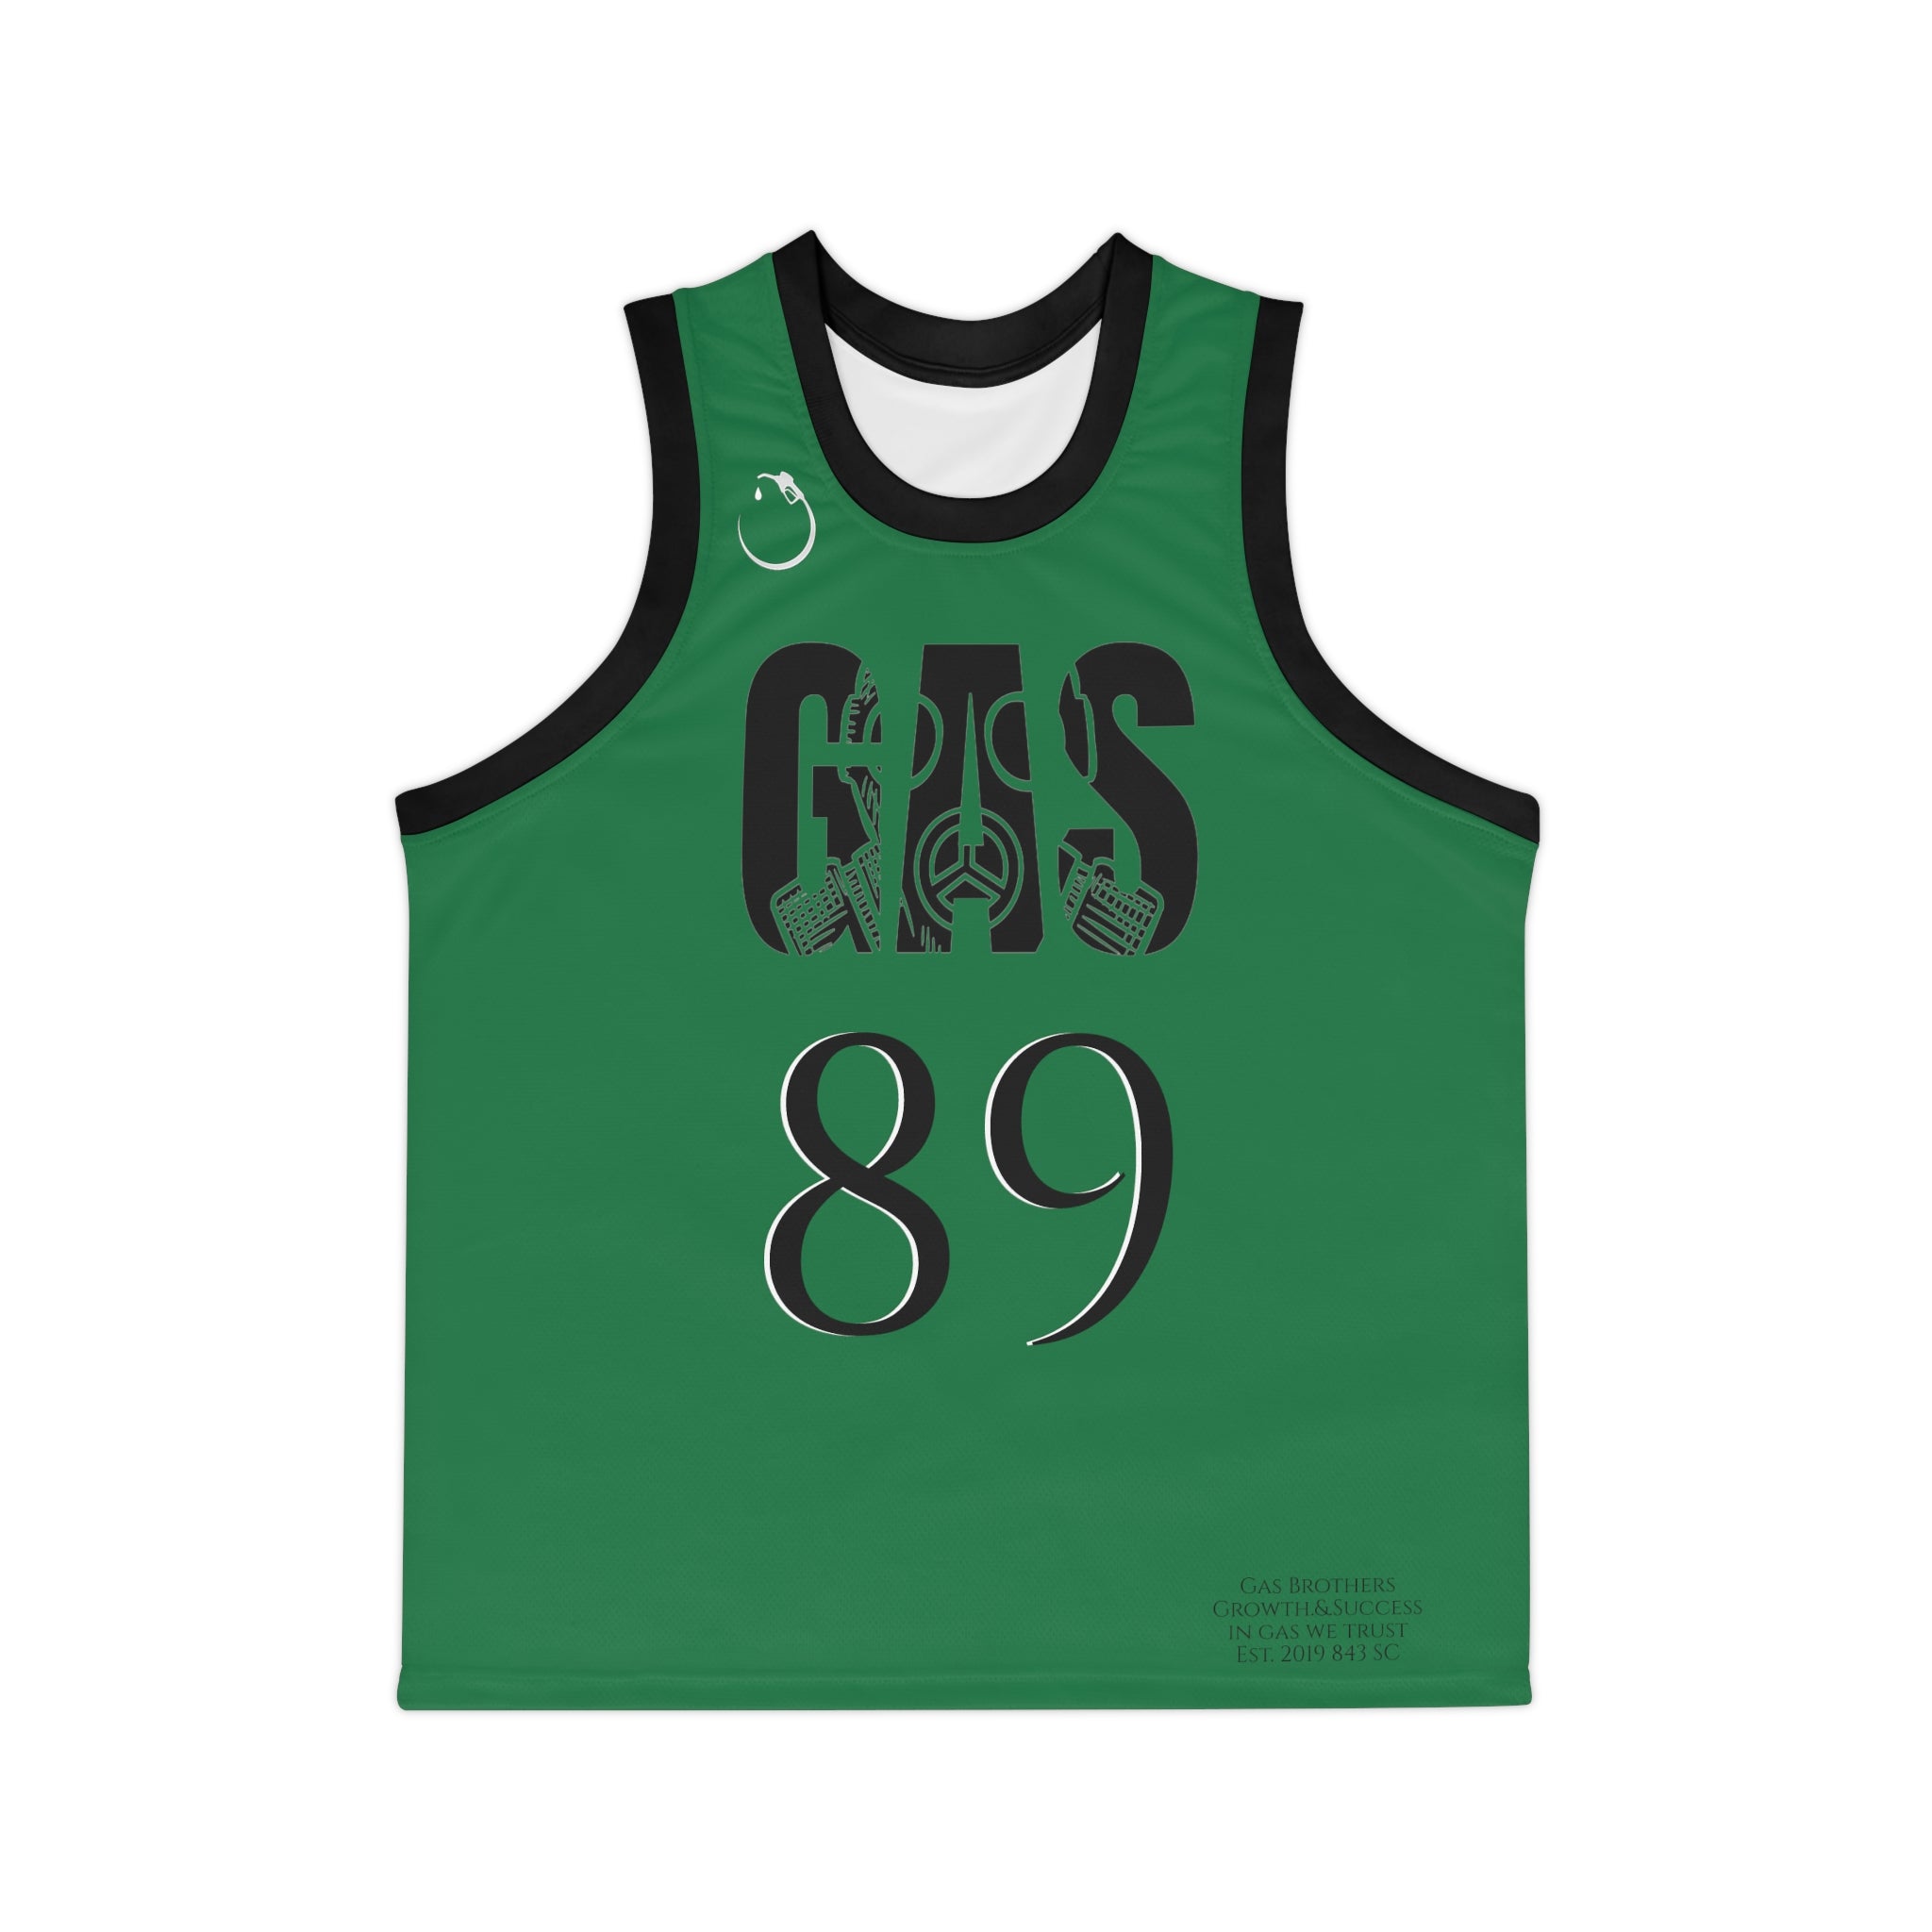 Celtics Green and Black flavored Gas Bros Unisex Basketball Jersey